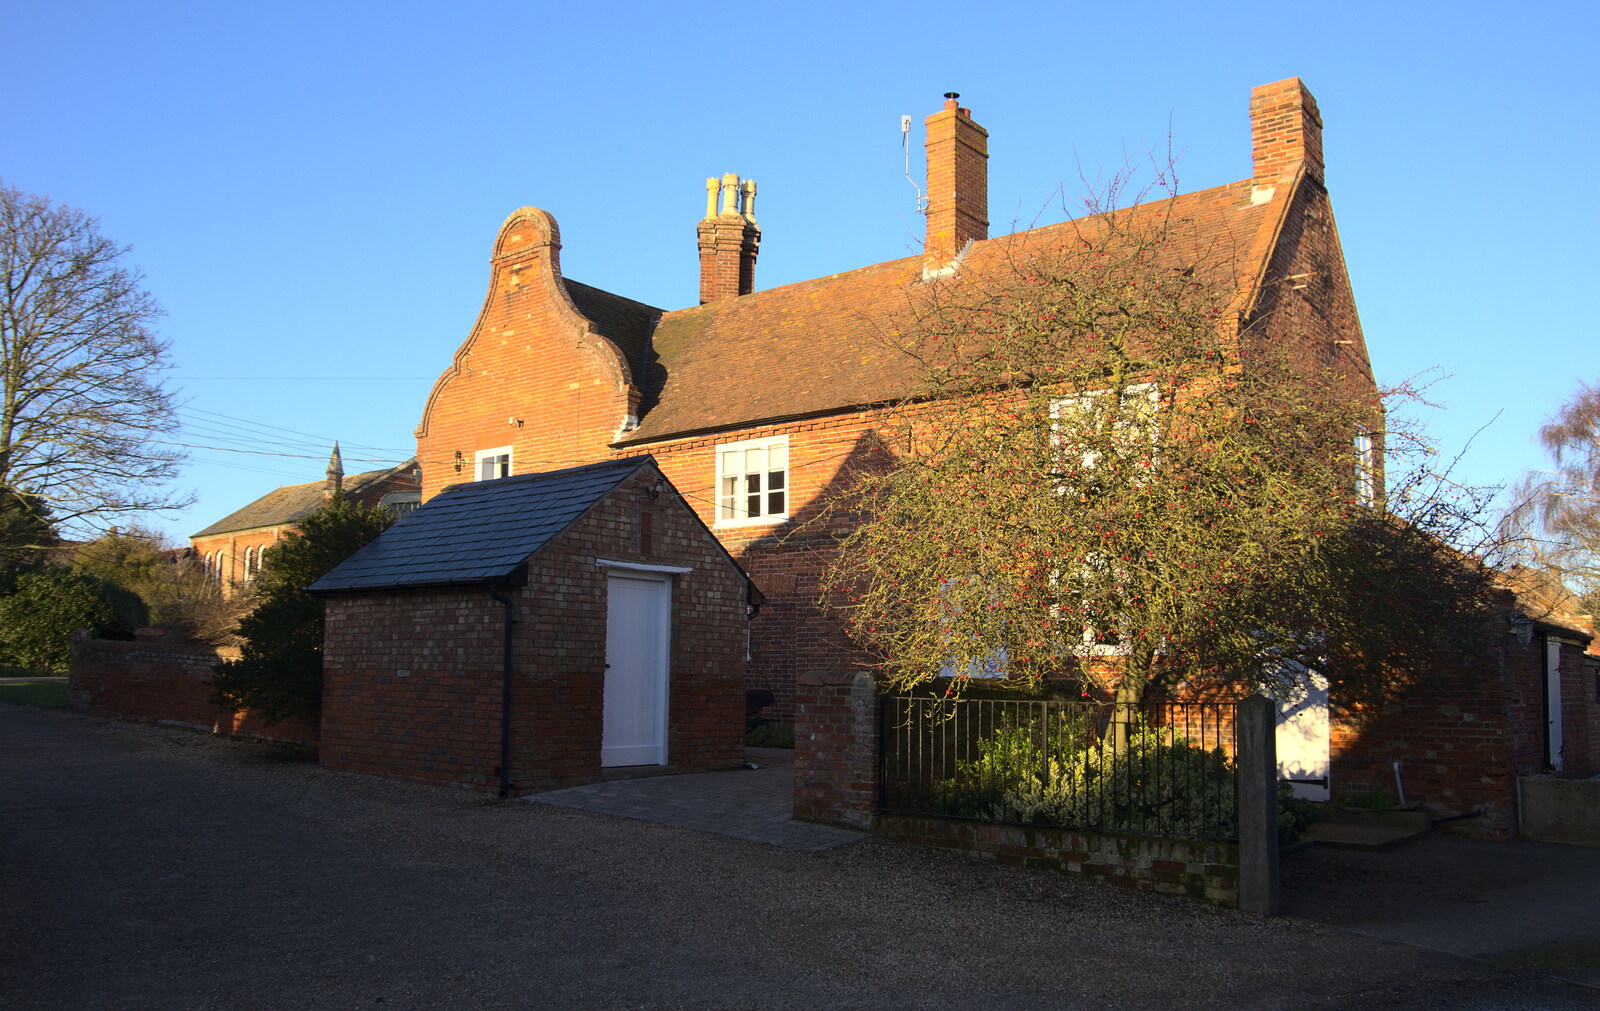 A nice old farmhouse from An Orford Day Out, Orford, Suffolk - 17th February 2018